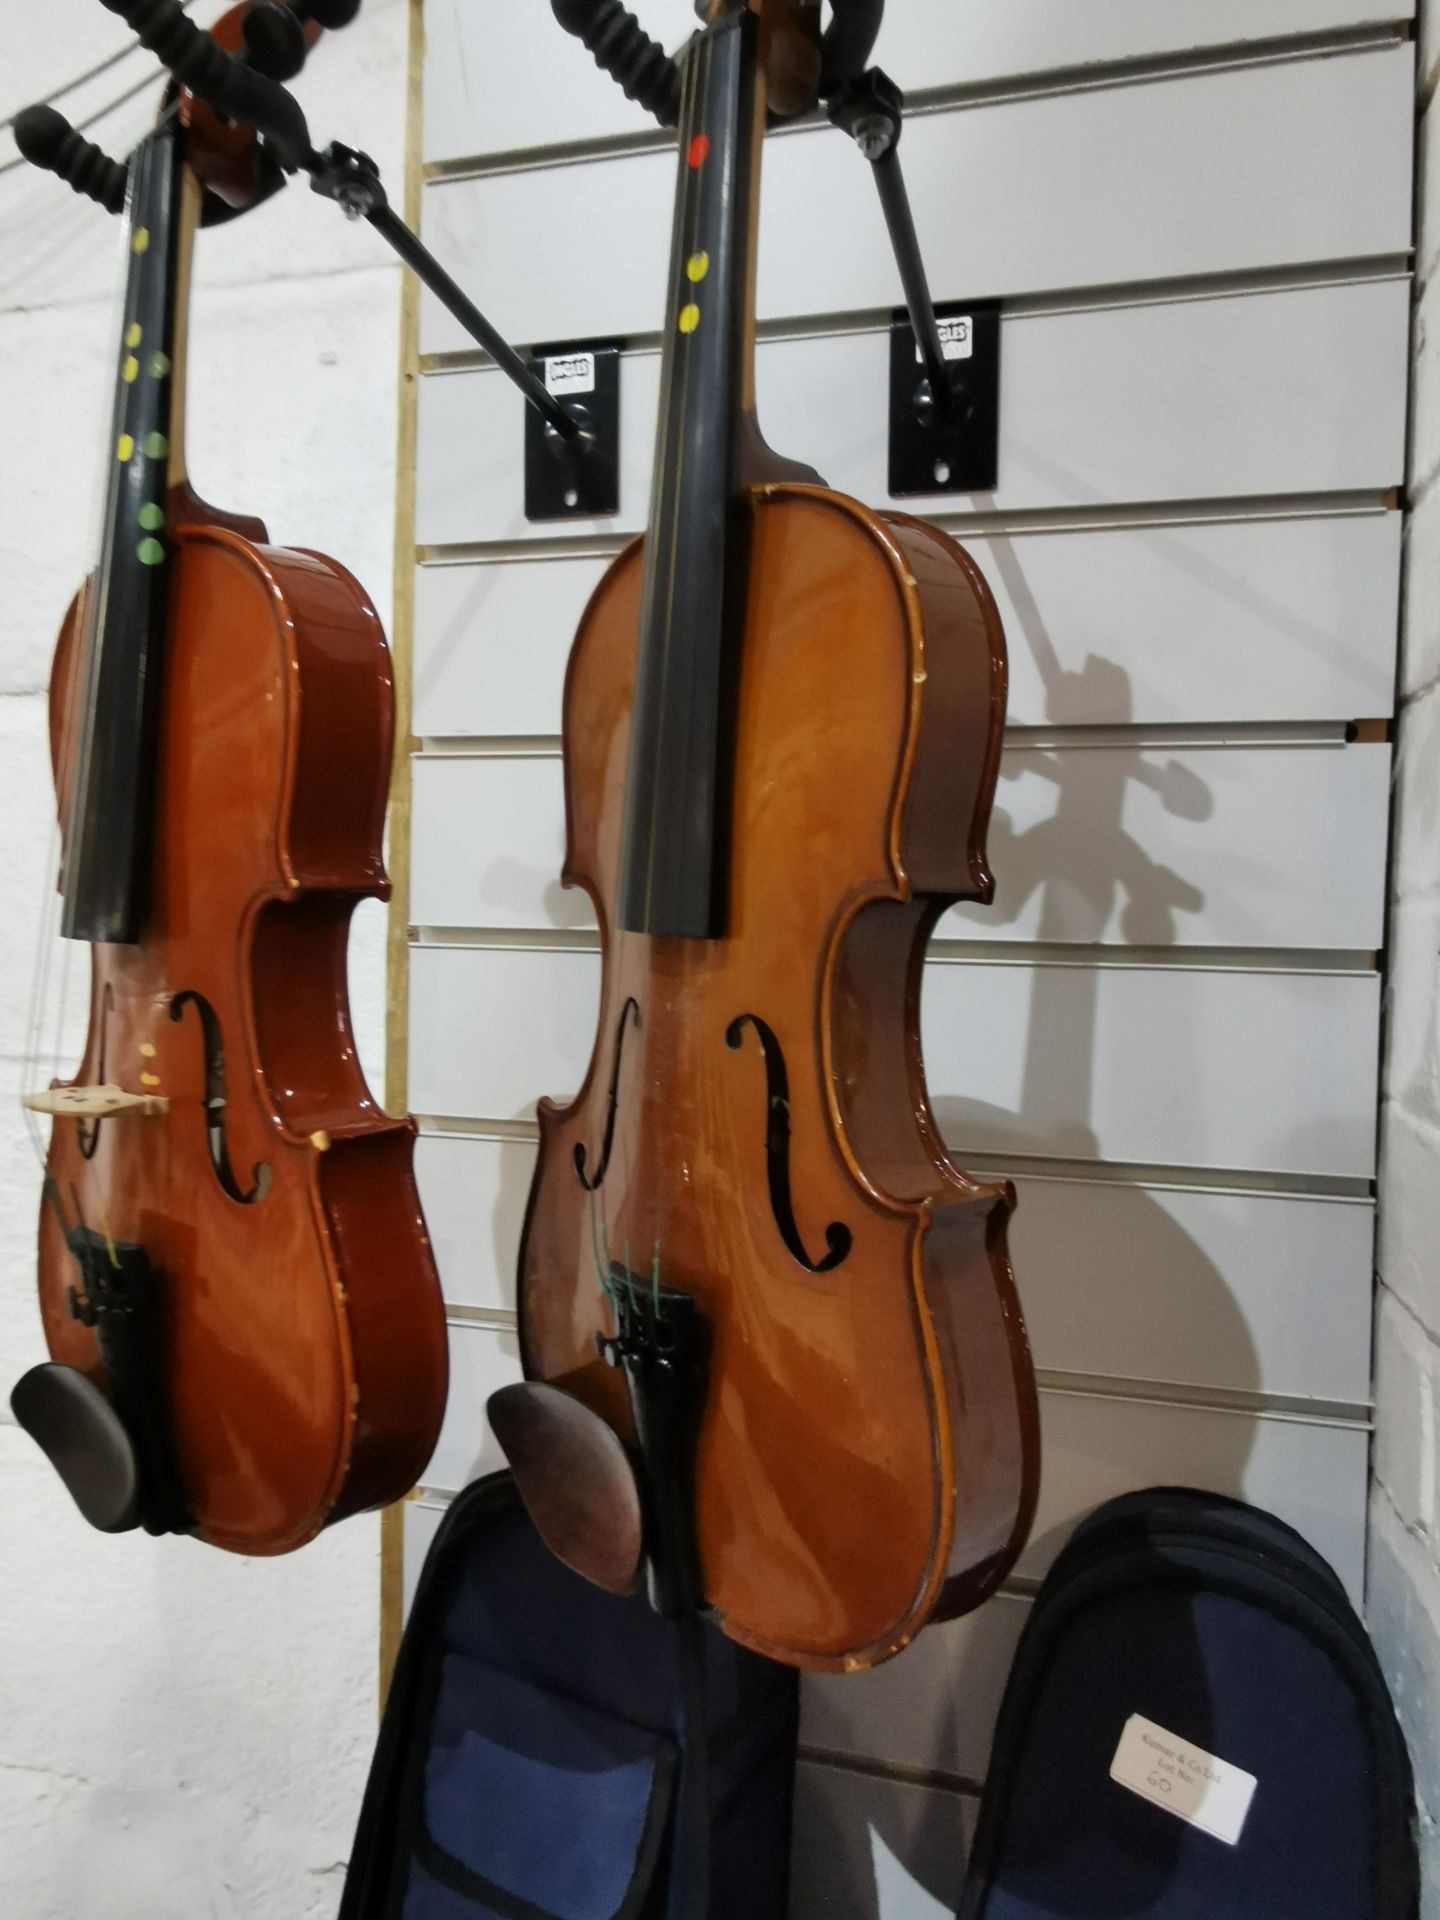 3/4 Used Violin With Case & 3/4 Used Violin With Case - Image 5 of 6